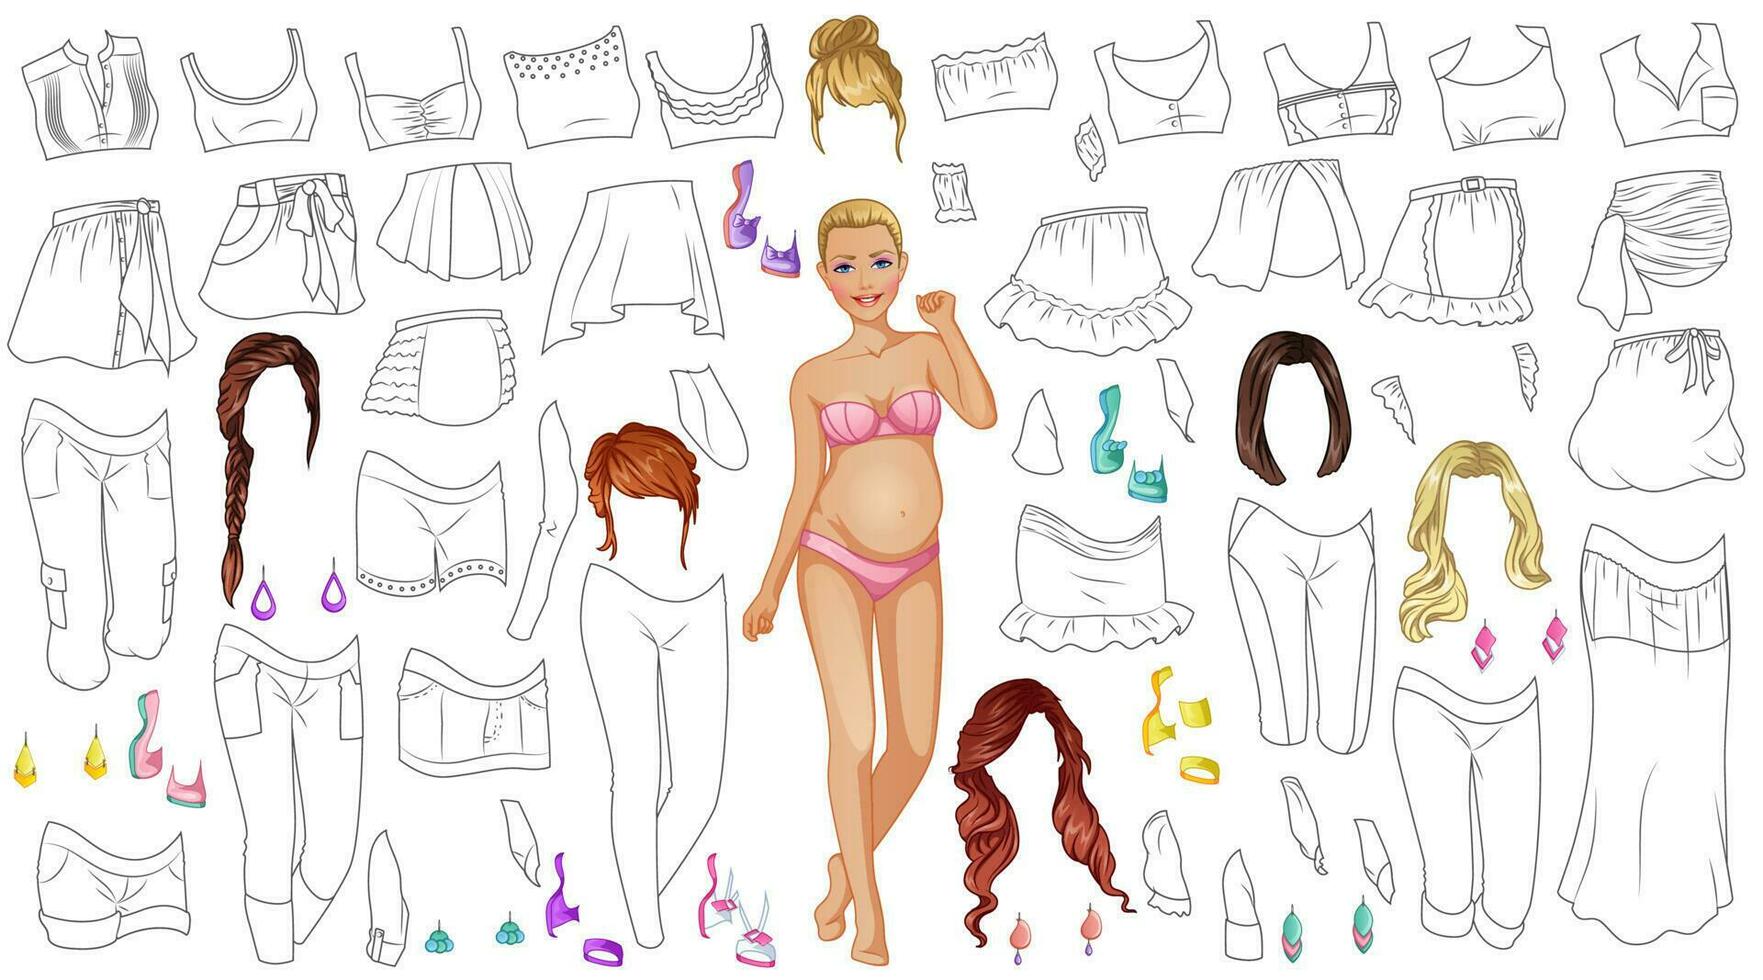 Pregnancy Coloring Paper Doll with Outfits, Hairstyles and Accessories. Vector Illustration